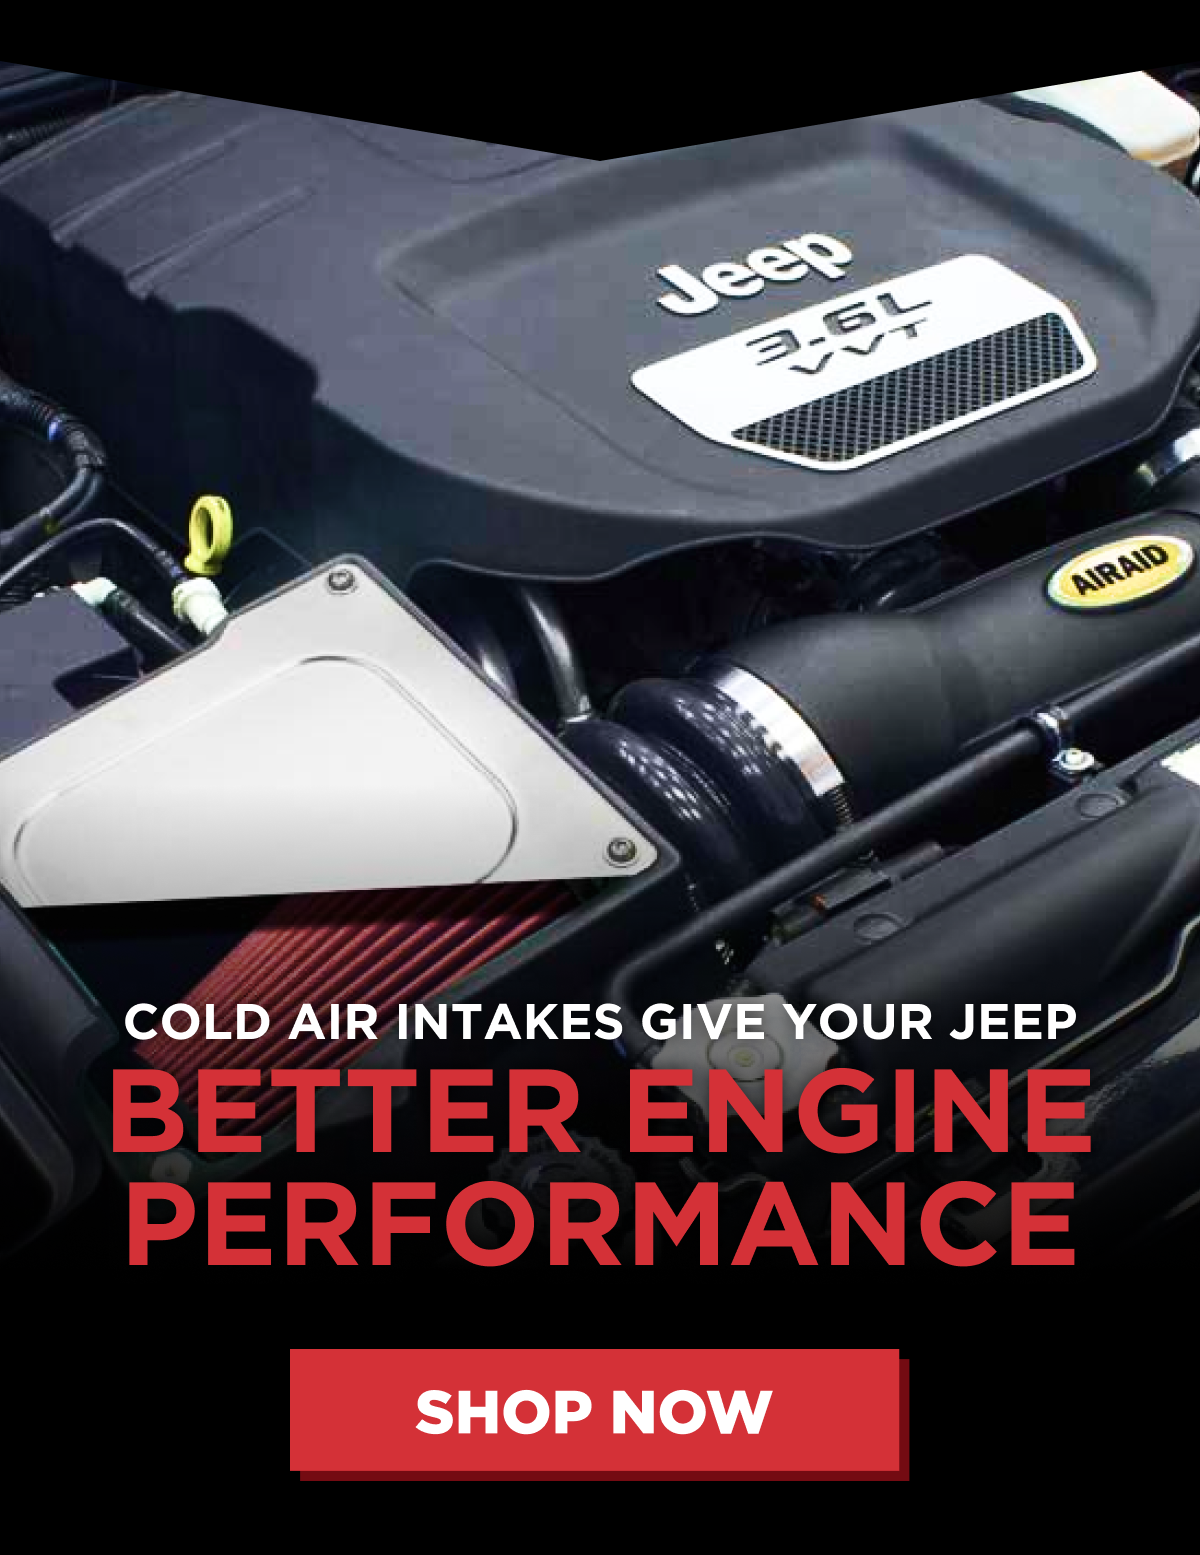 Cold Air Intakes Give Your Jeep Better Engine Performance